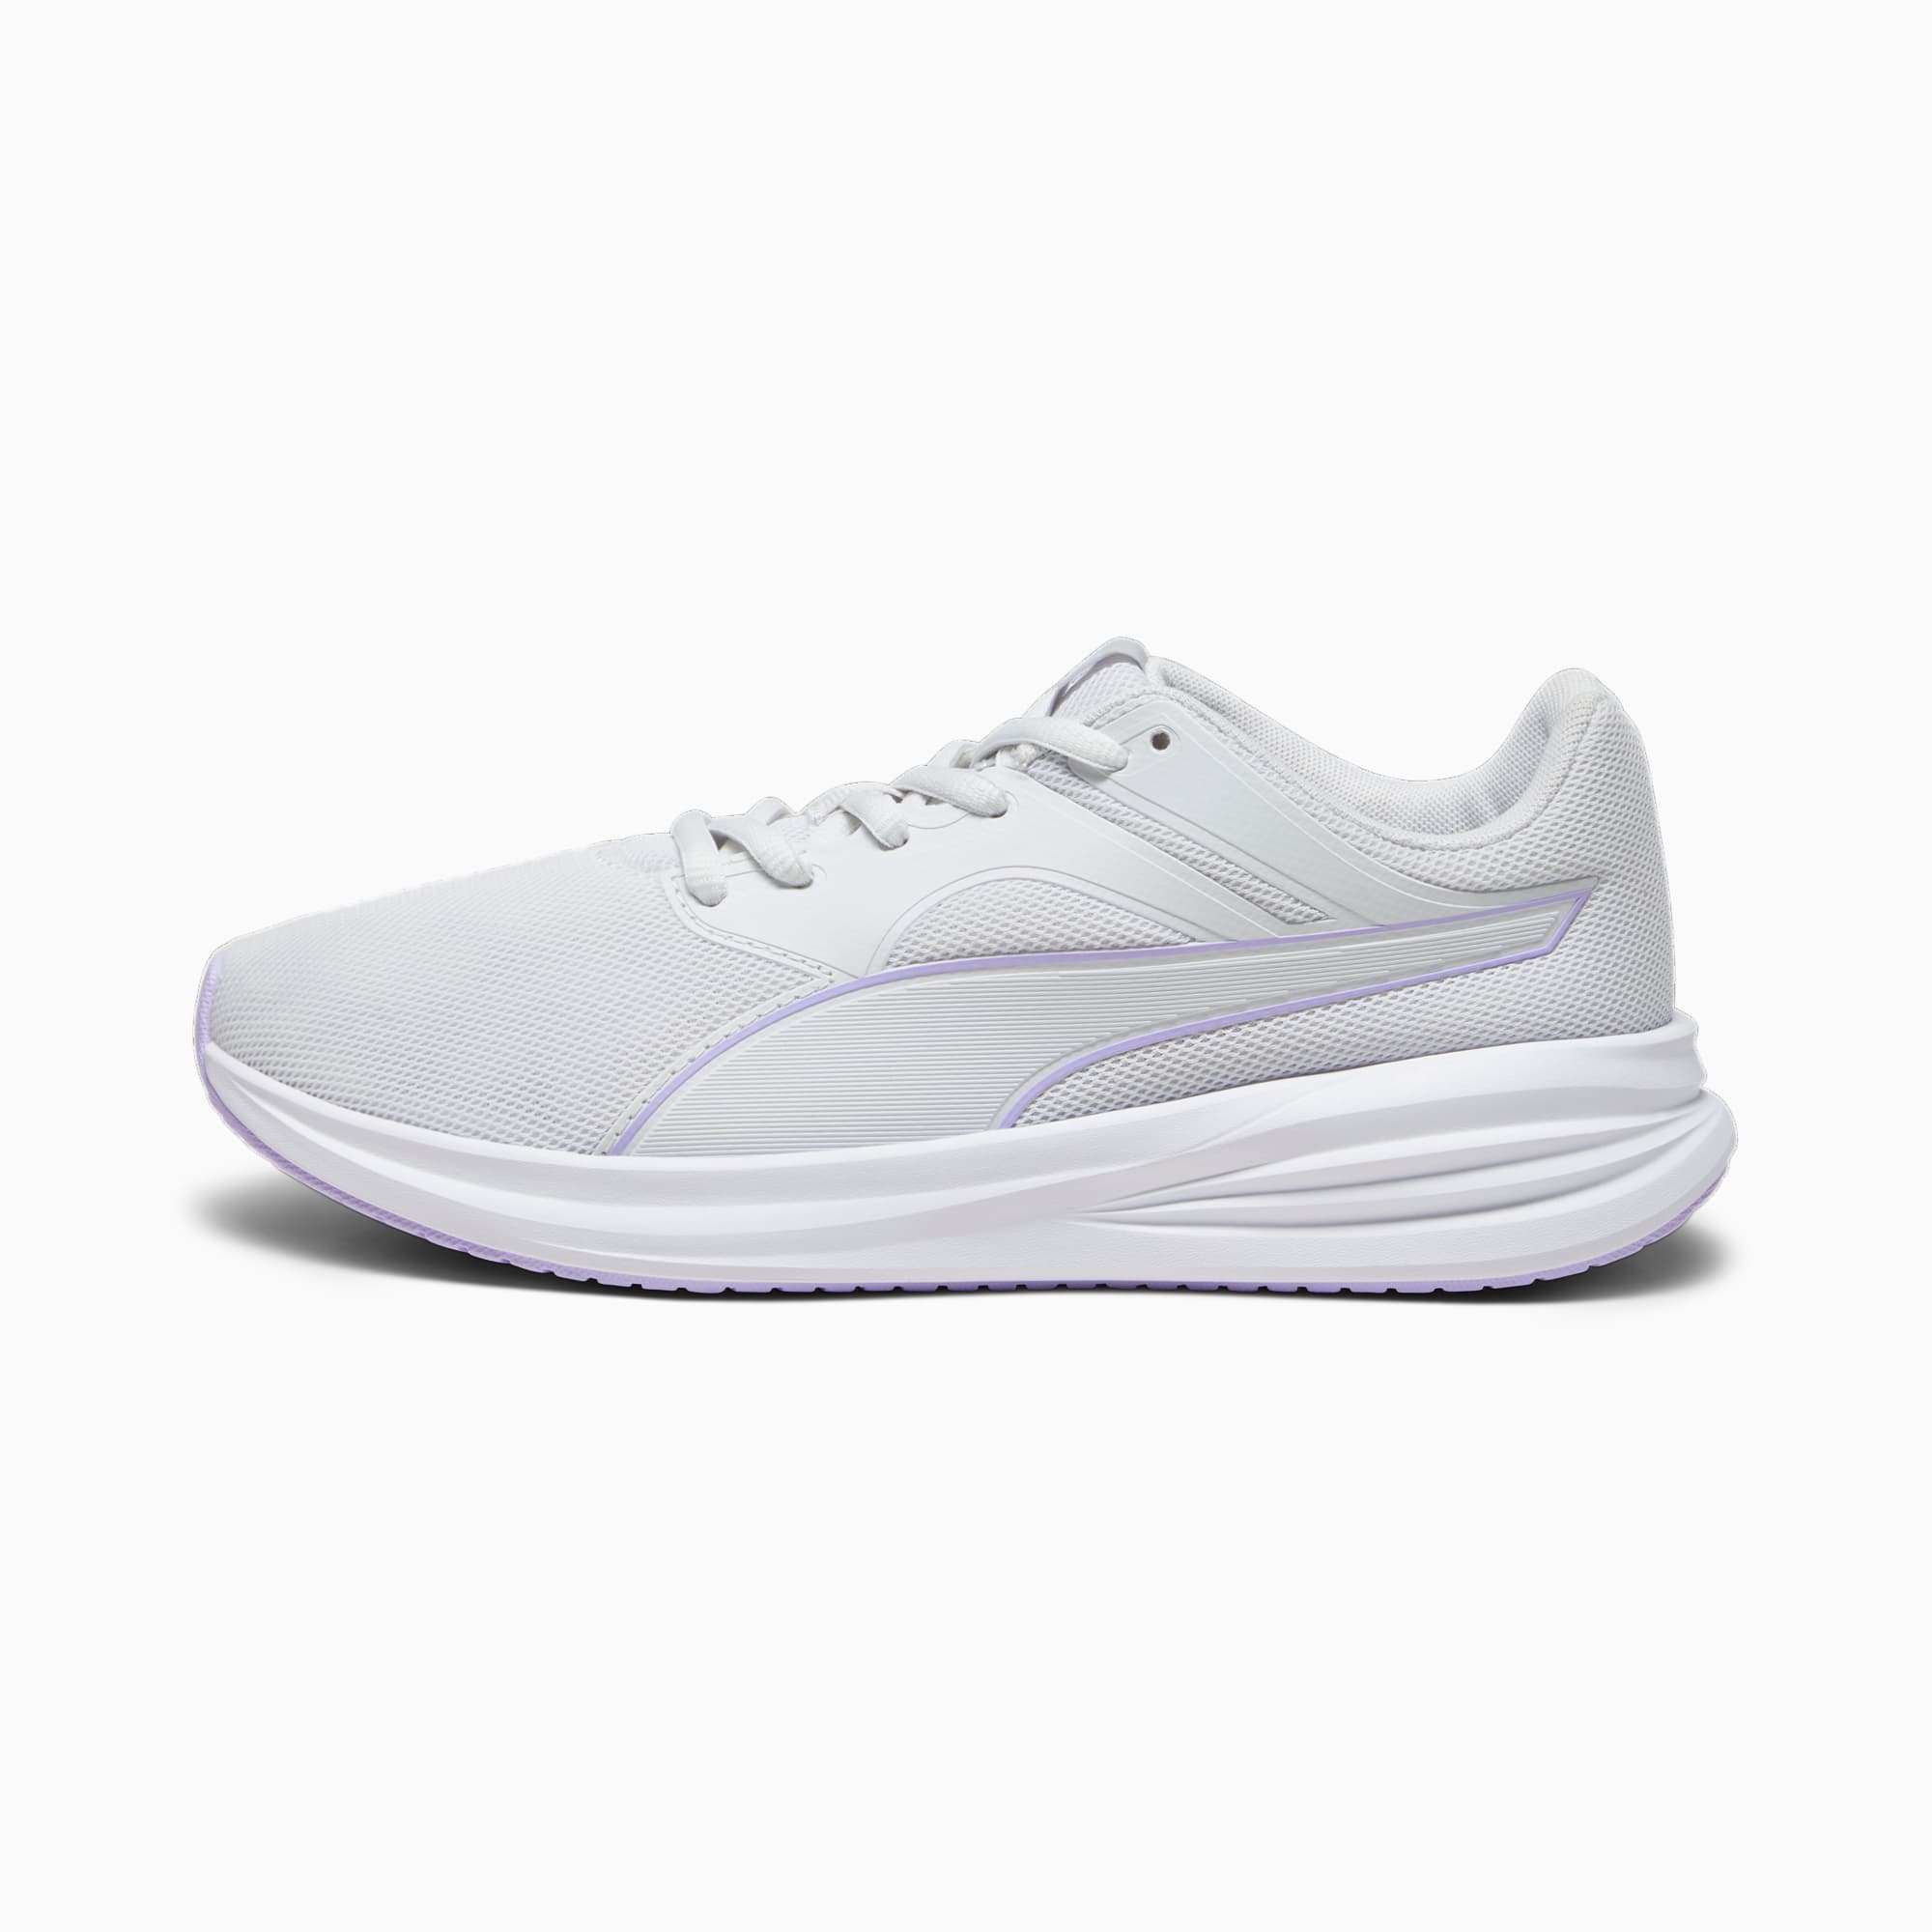 Women's PUMA Transport Running Shoe Sneakers, Feather Grey/Vivid Violet, Size 35,5, Shoes